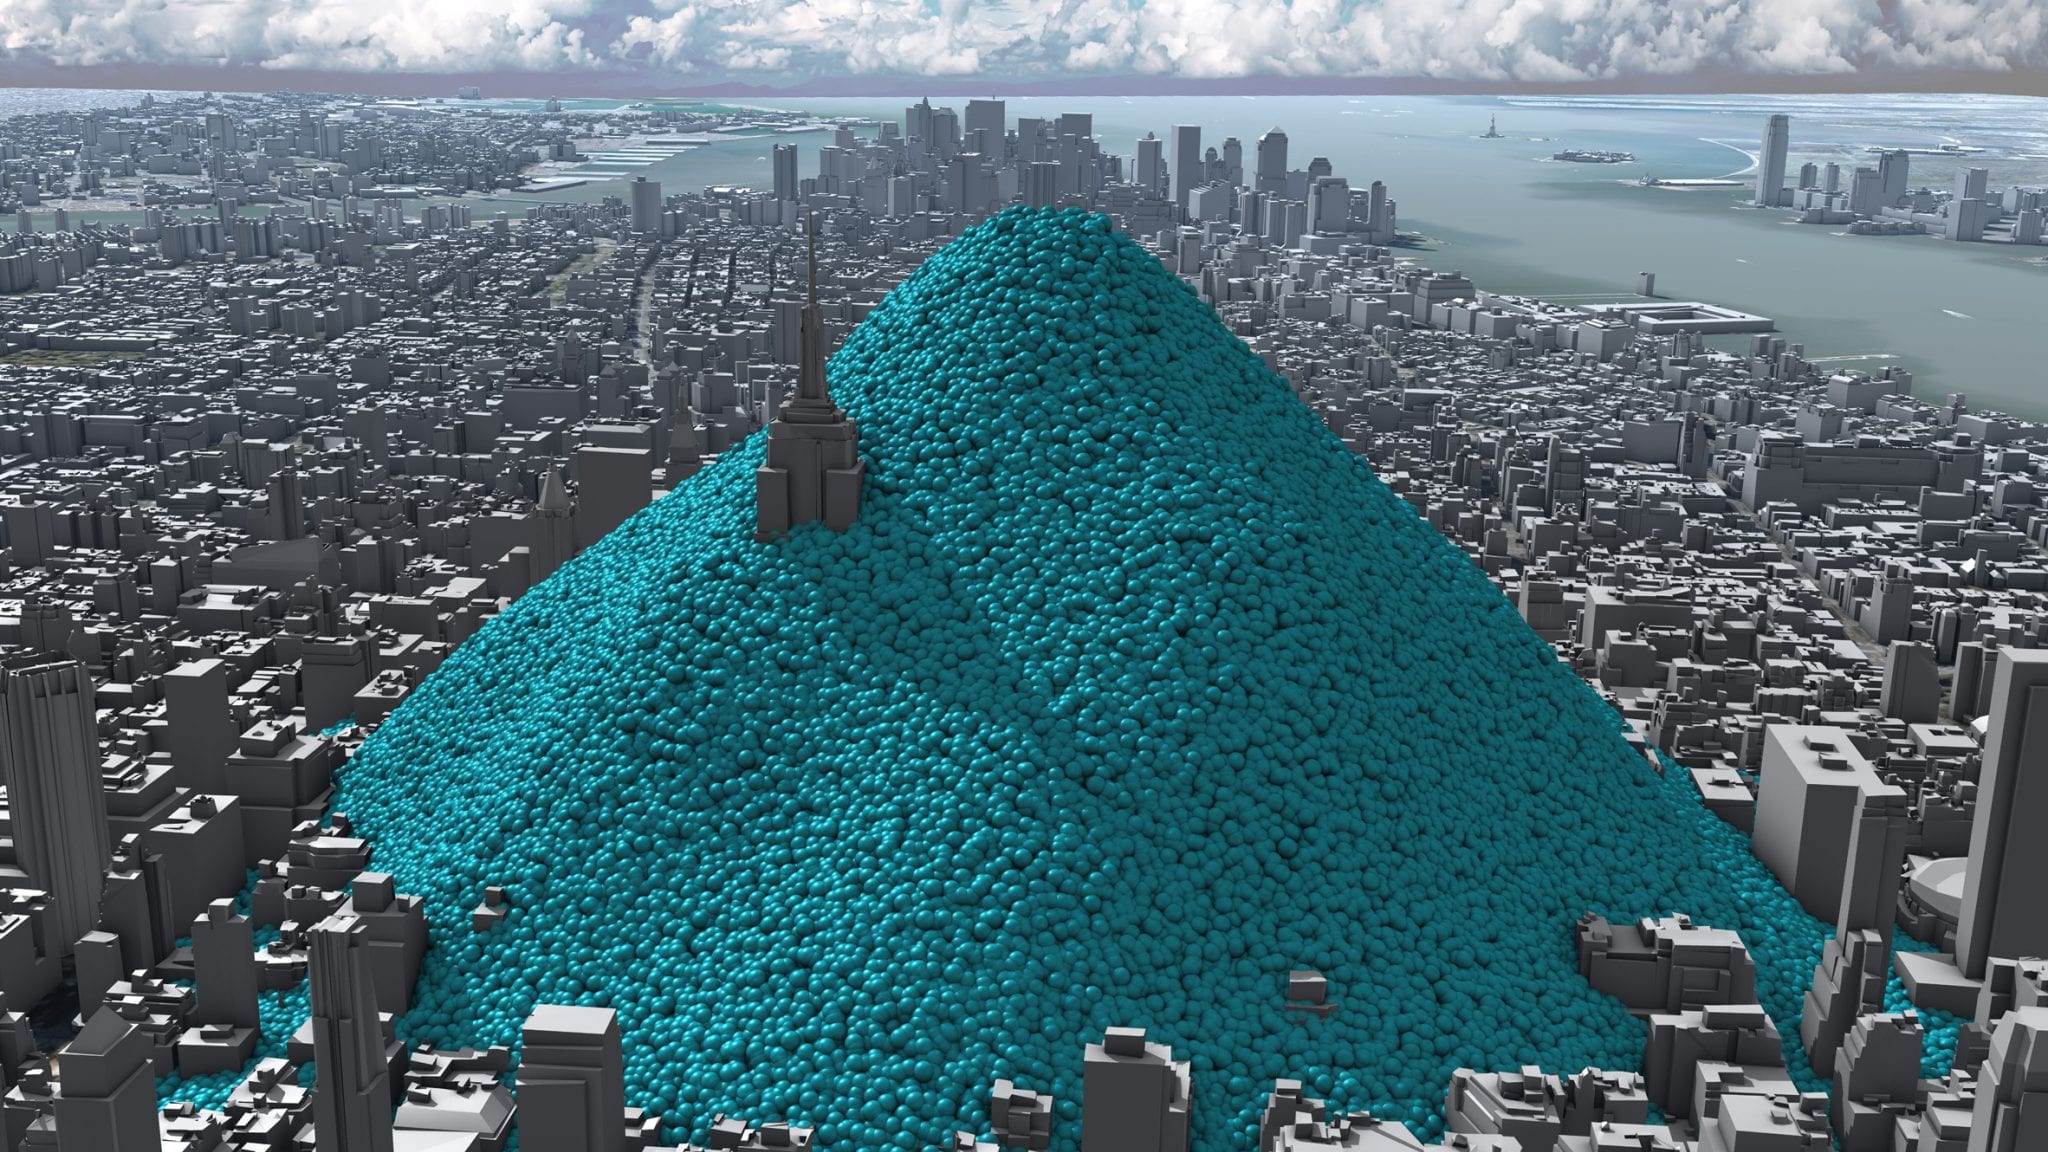 New York being buried under a mountain of blue bubbles